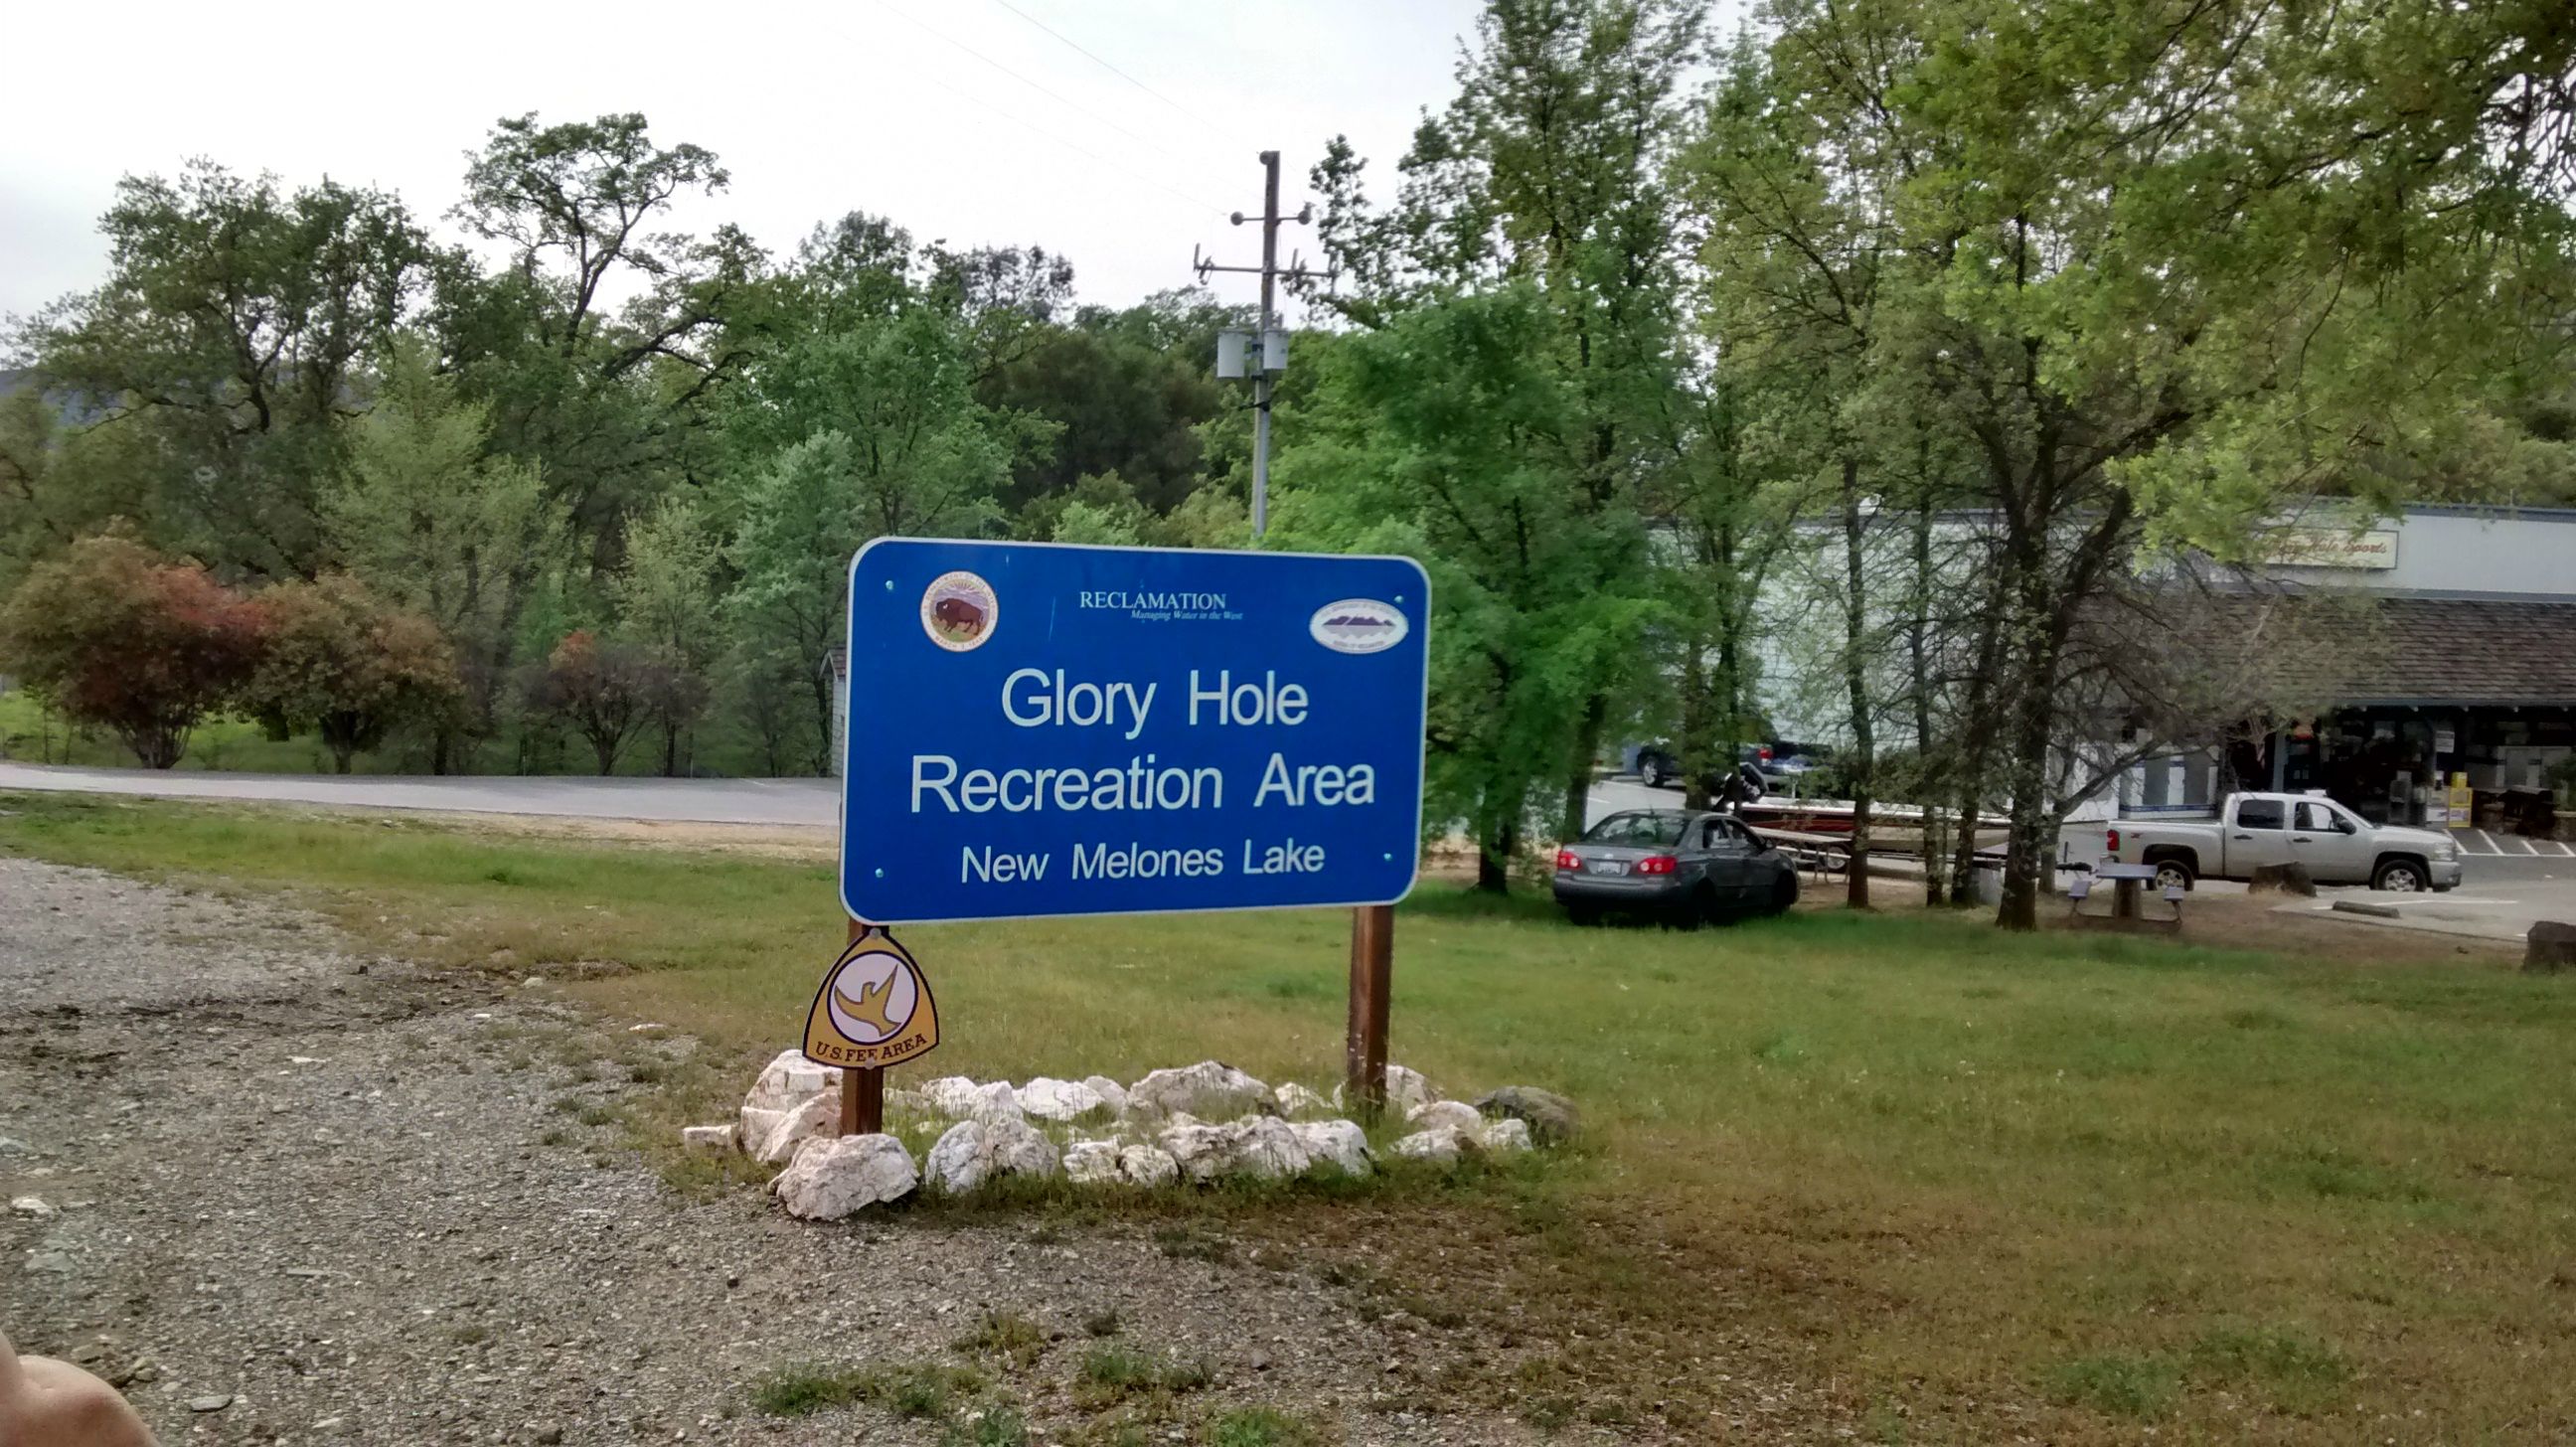 Condoms and glory holes